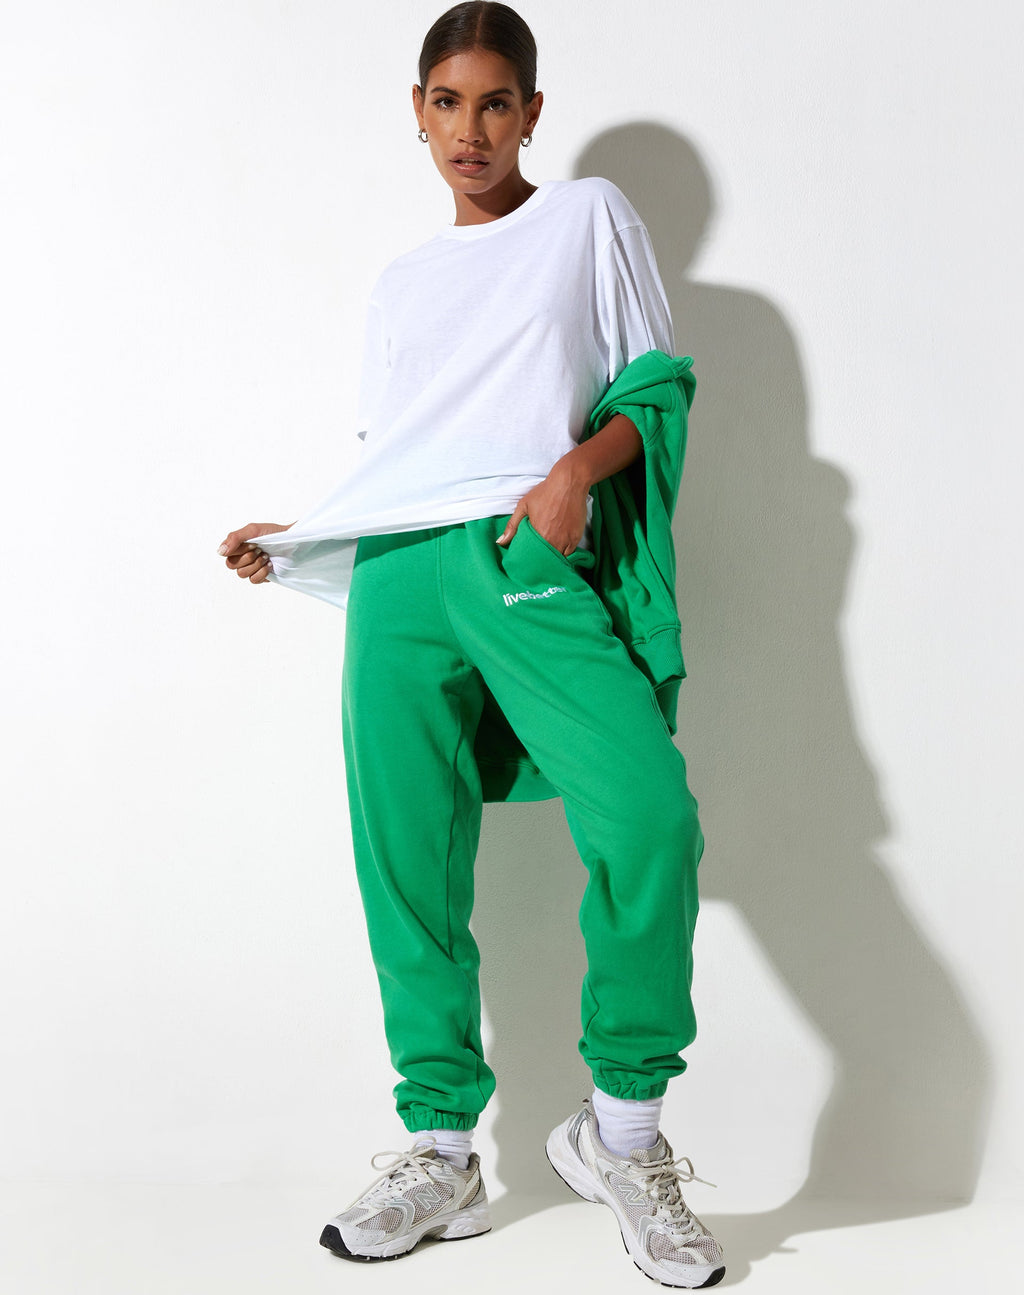 Basta Jogger in Fun Green with 'Live Better' Embro